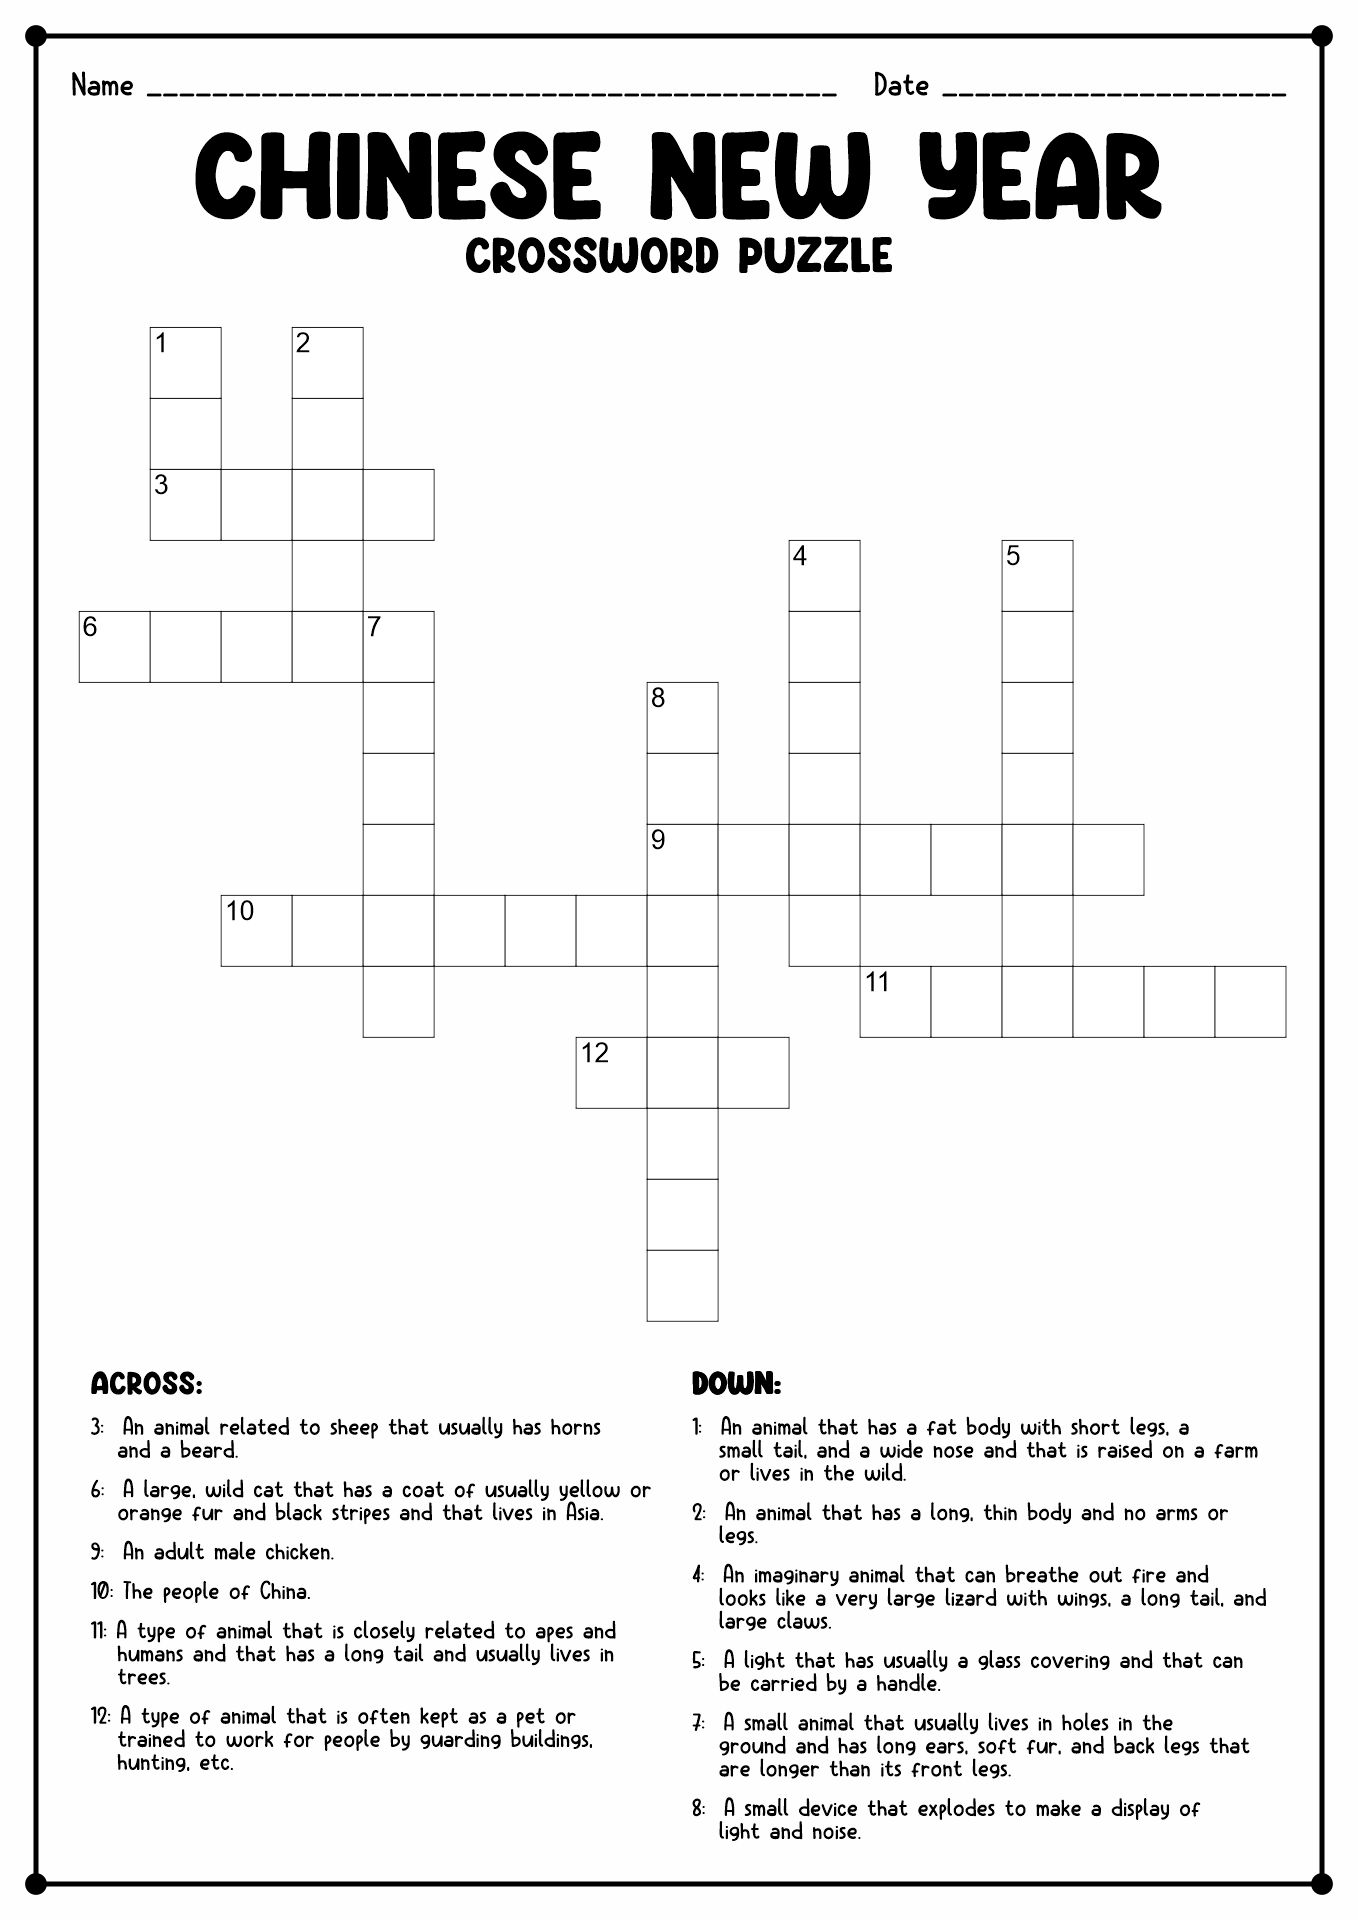 Chinese New Year Crossword Puzzle Image